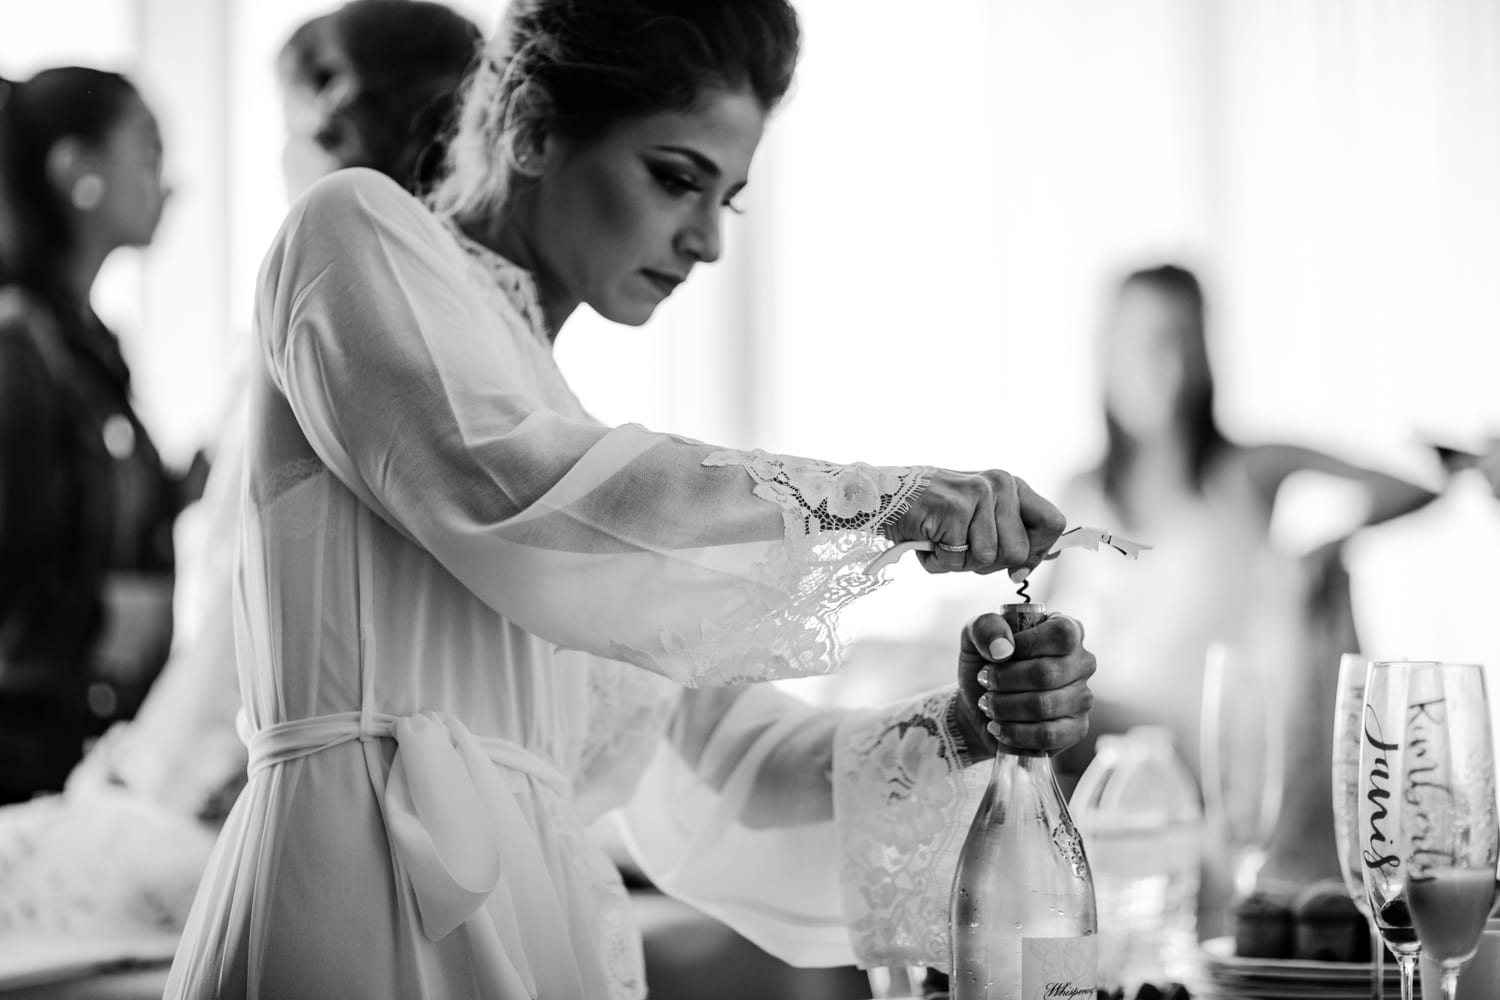 A woman pouring wine at the Eden Roc Resort in Miami for a wedding.